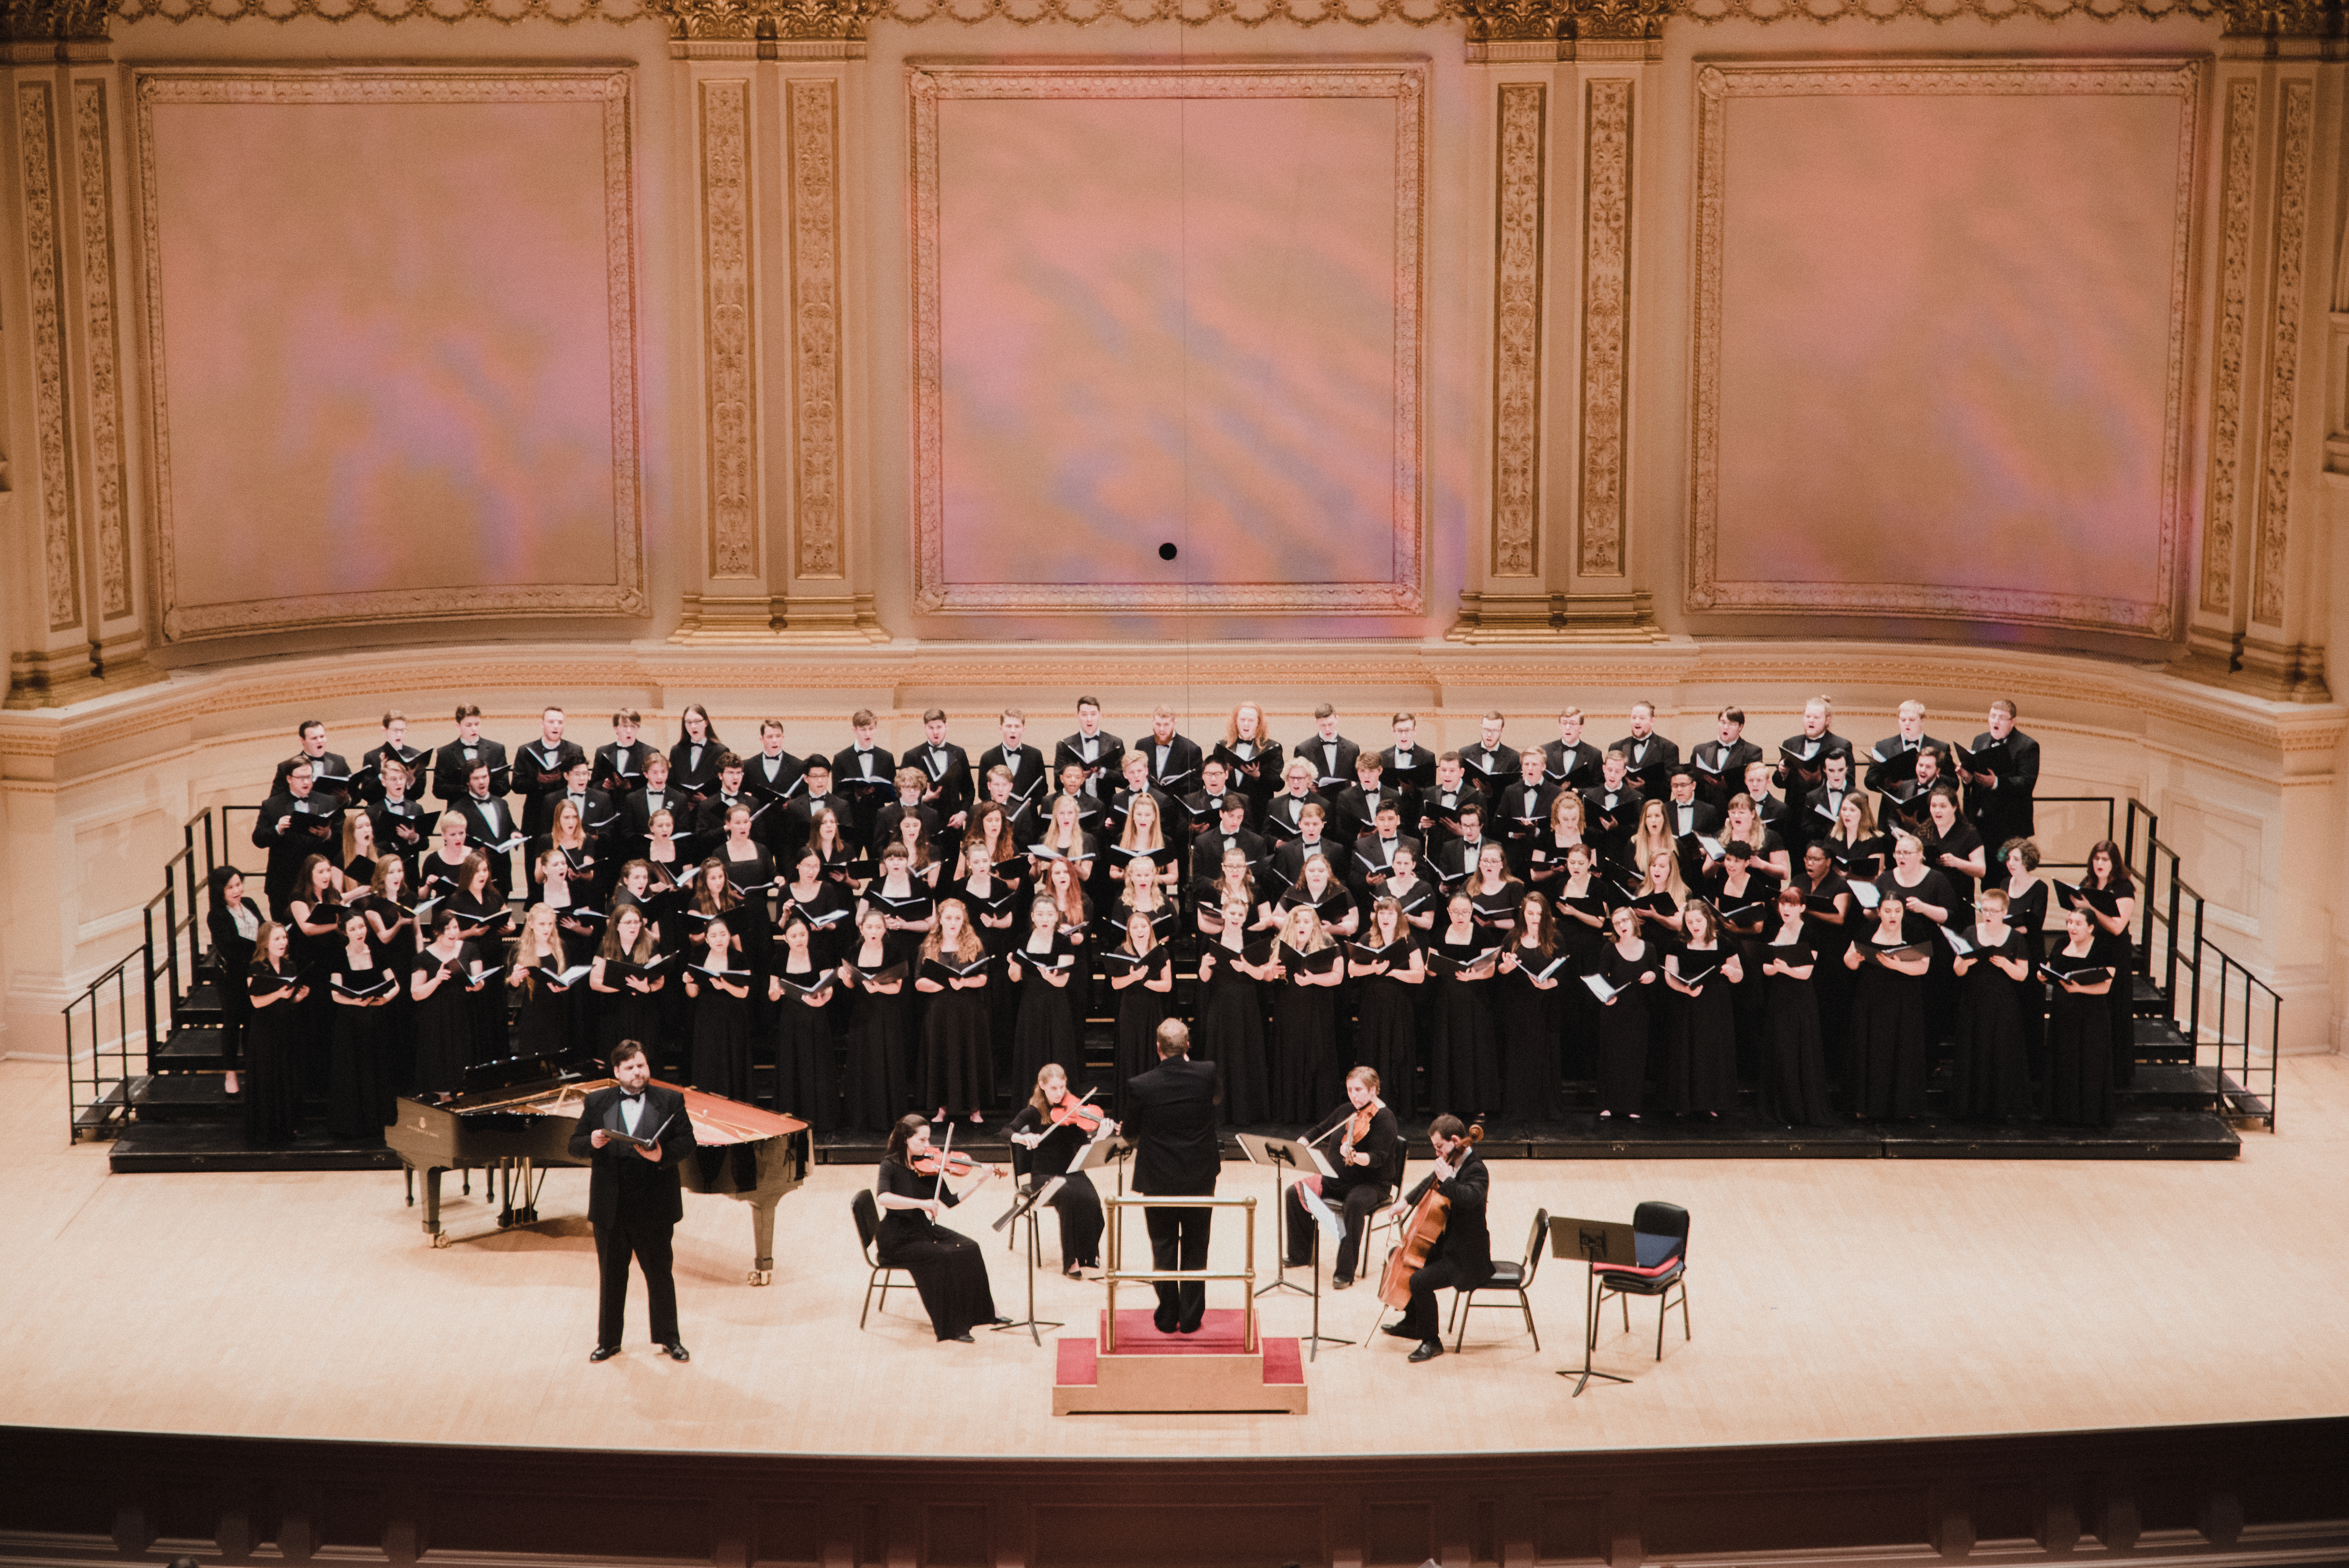 Distinguished Concerts International New York (DCINY) presents Vocal Colors in Review